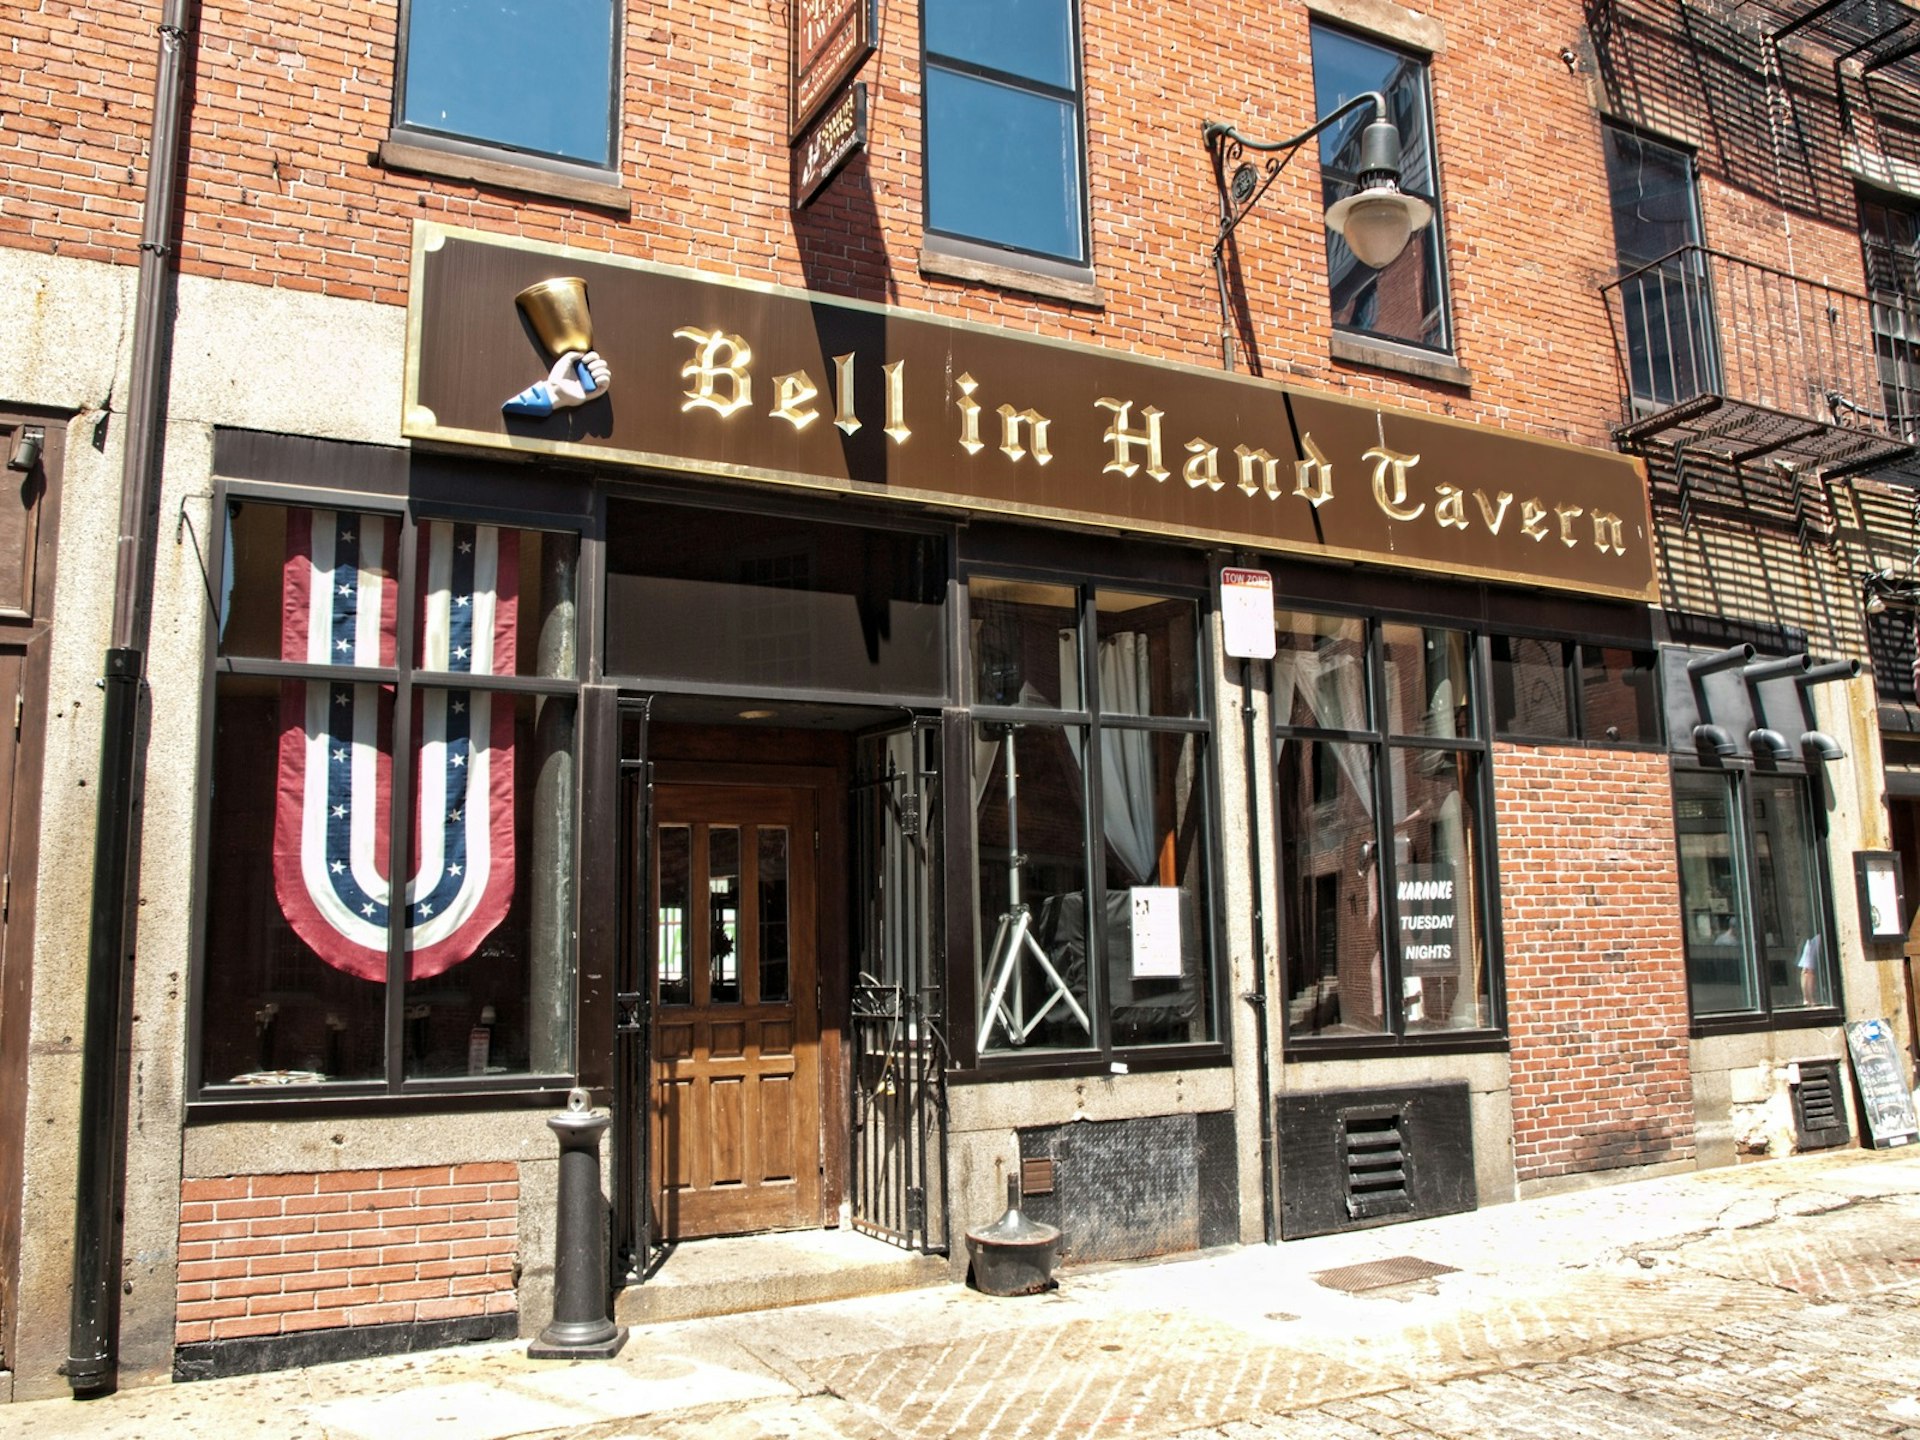 A long brown sign with an image of a hand and a bell mark this brick pub as the historic Bell in Hand Tavern